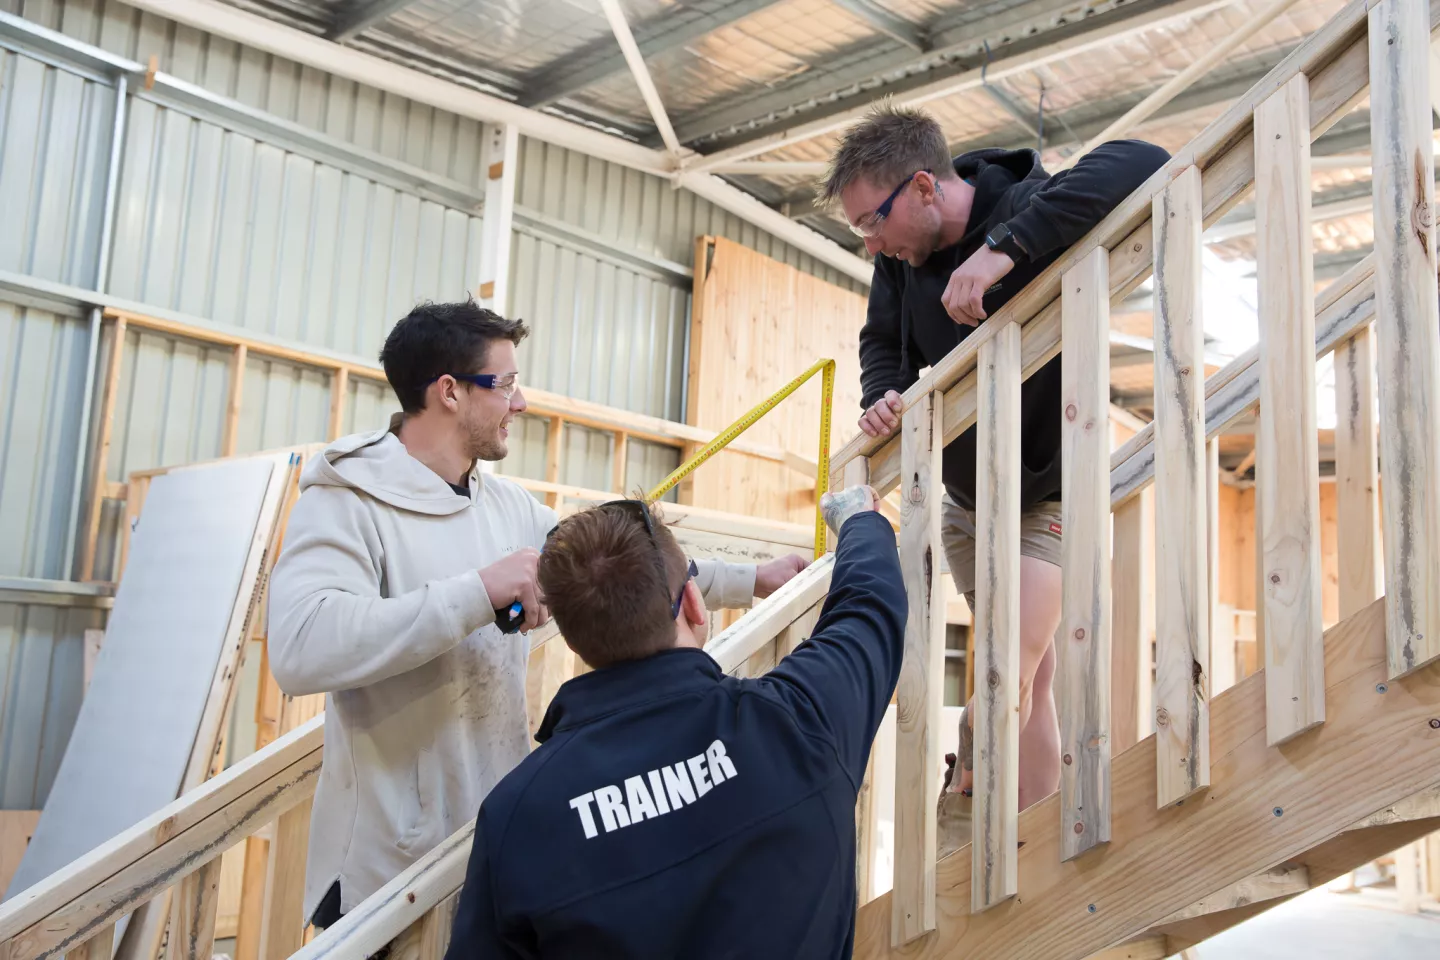 Carpentry apprenticeship students with trainer.